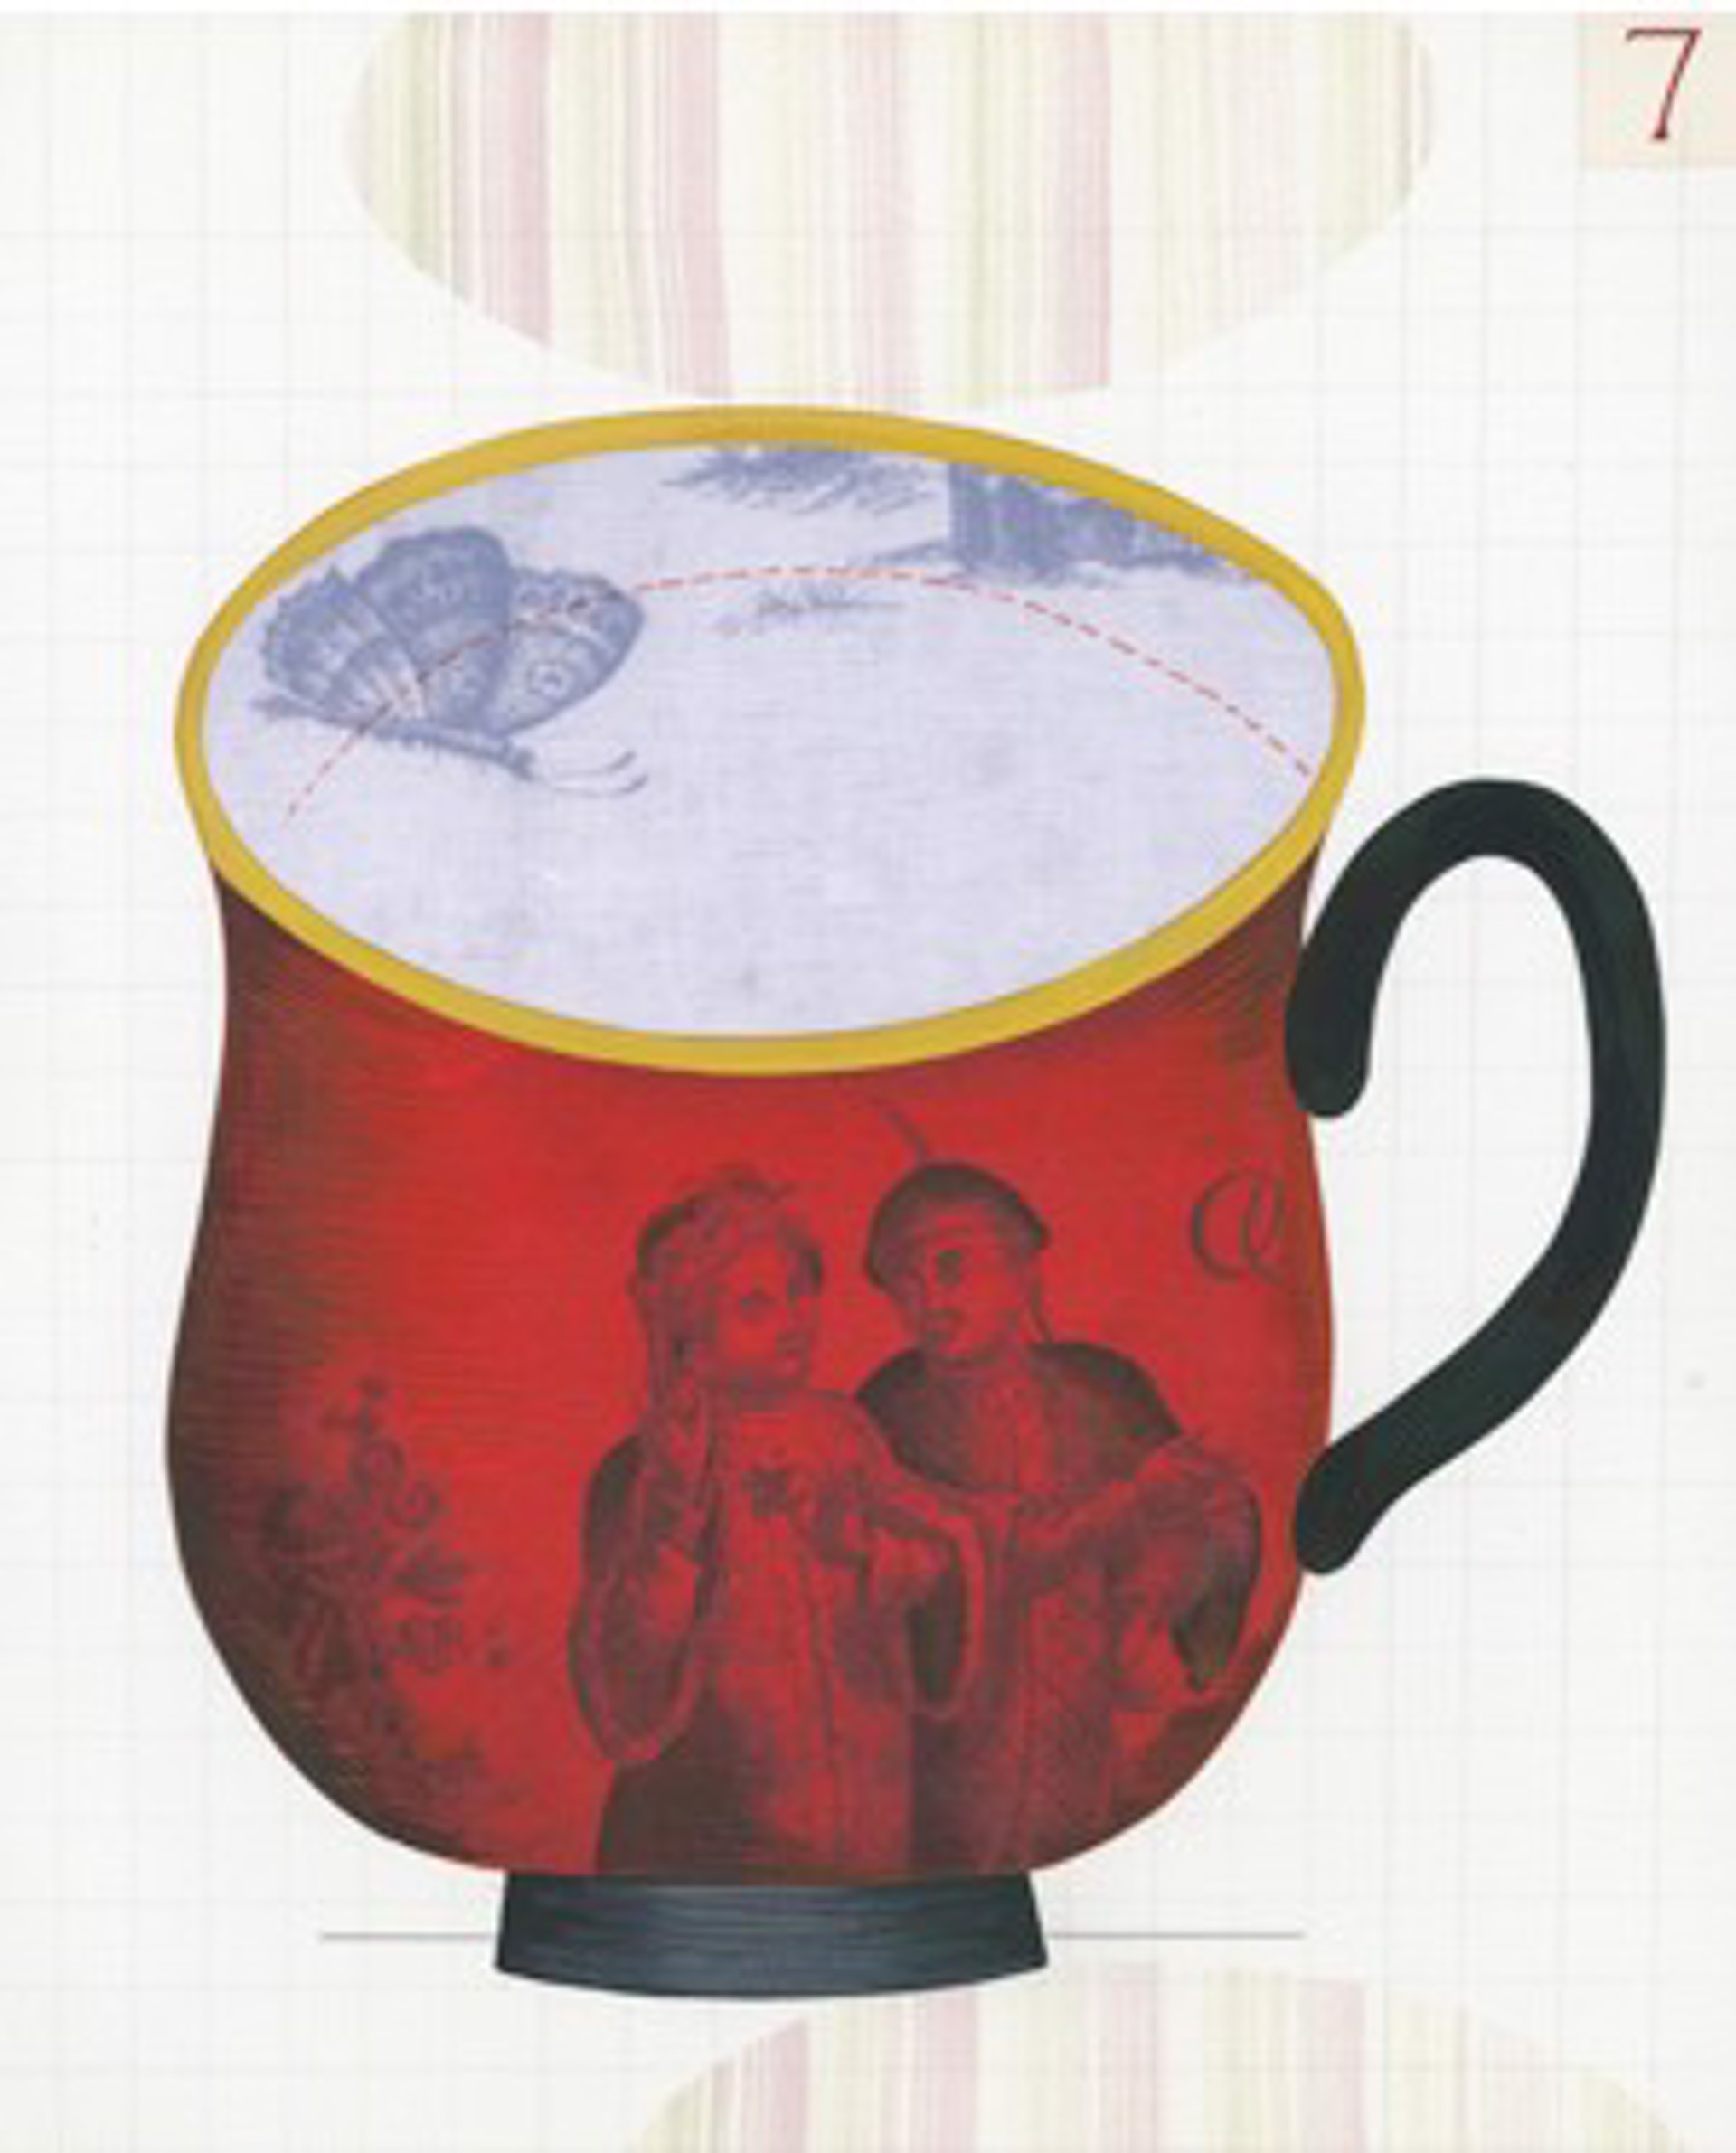 Cup No. 7 by Anne Smith